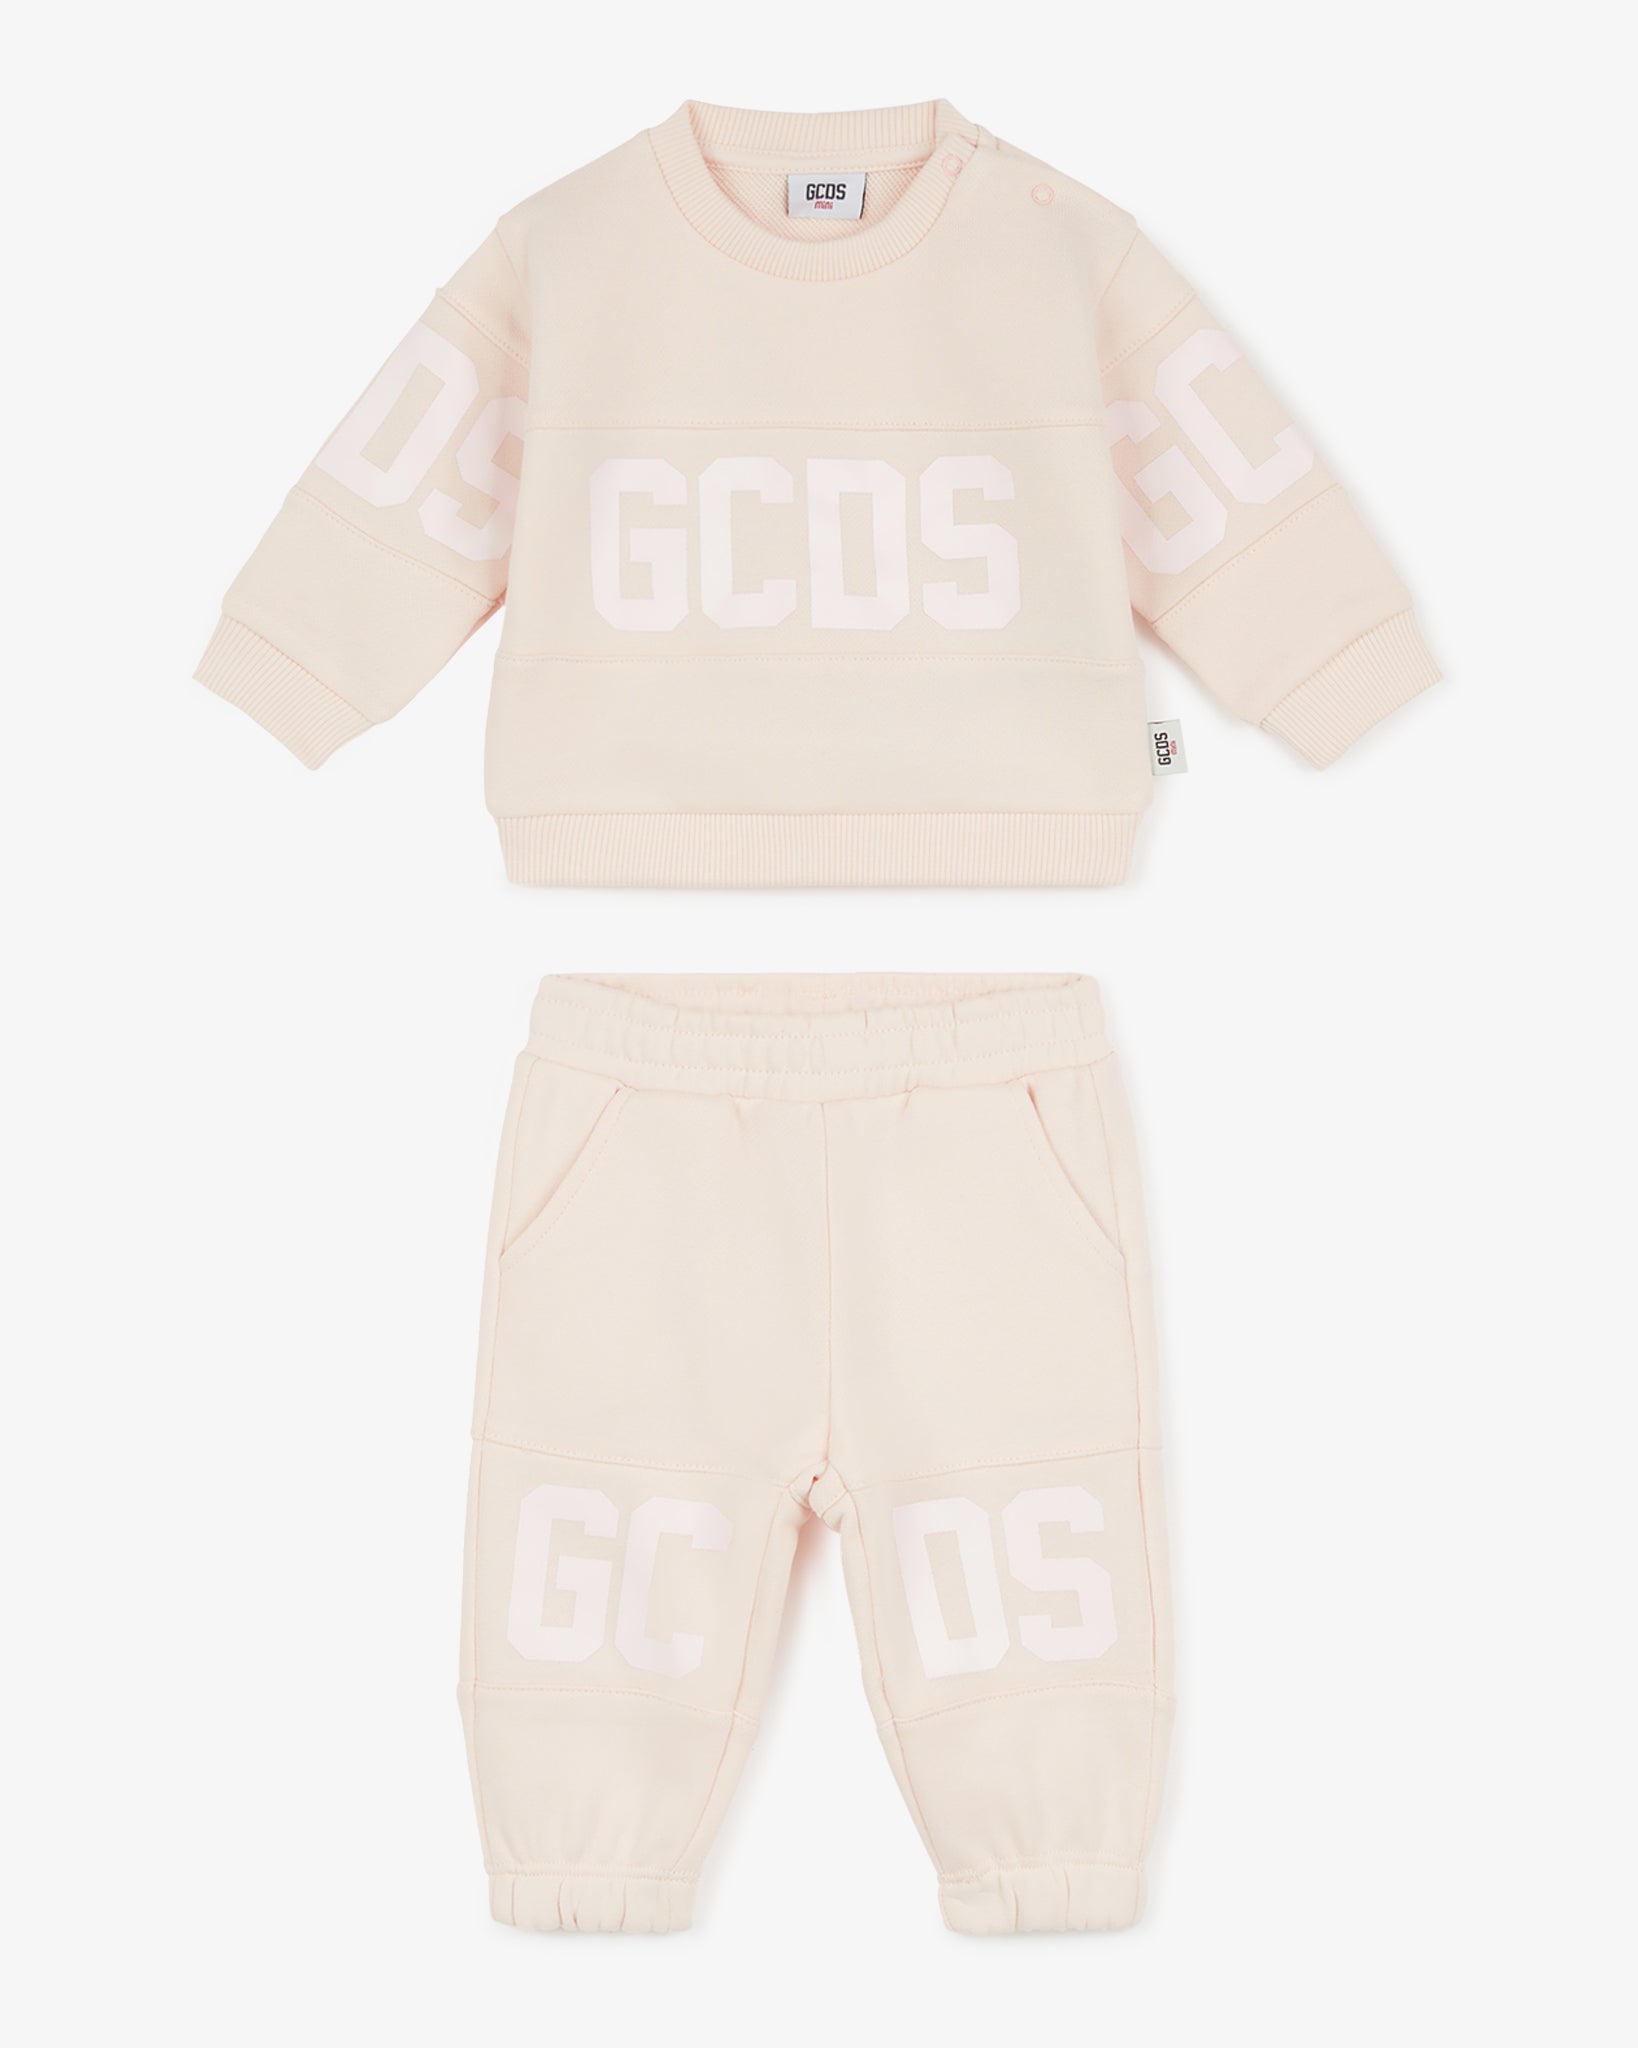 Kids Collection | Clothing, Shoes & Accessories | GCDS®